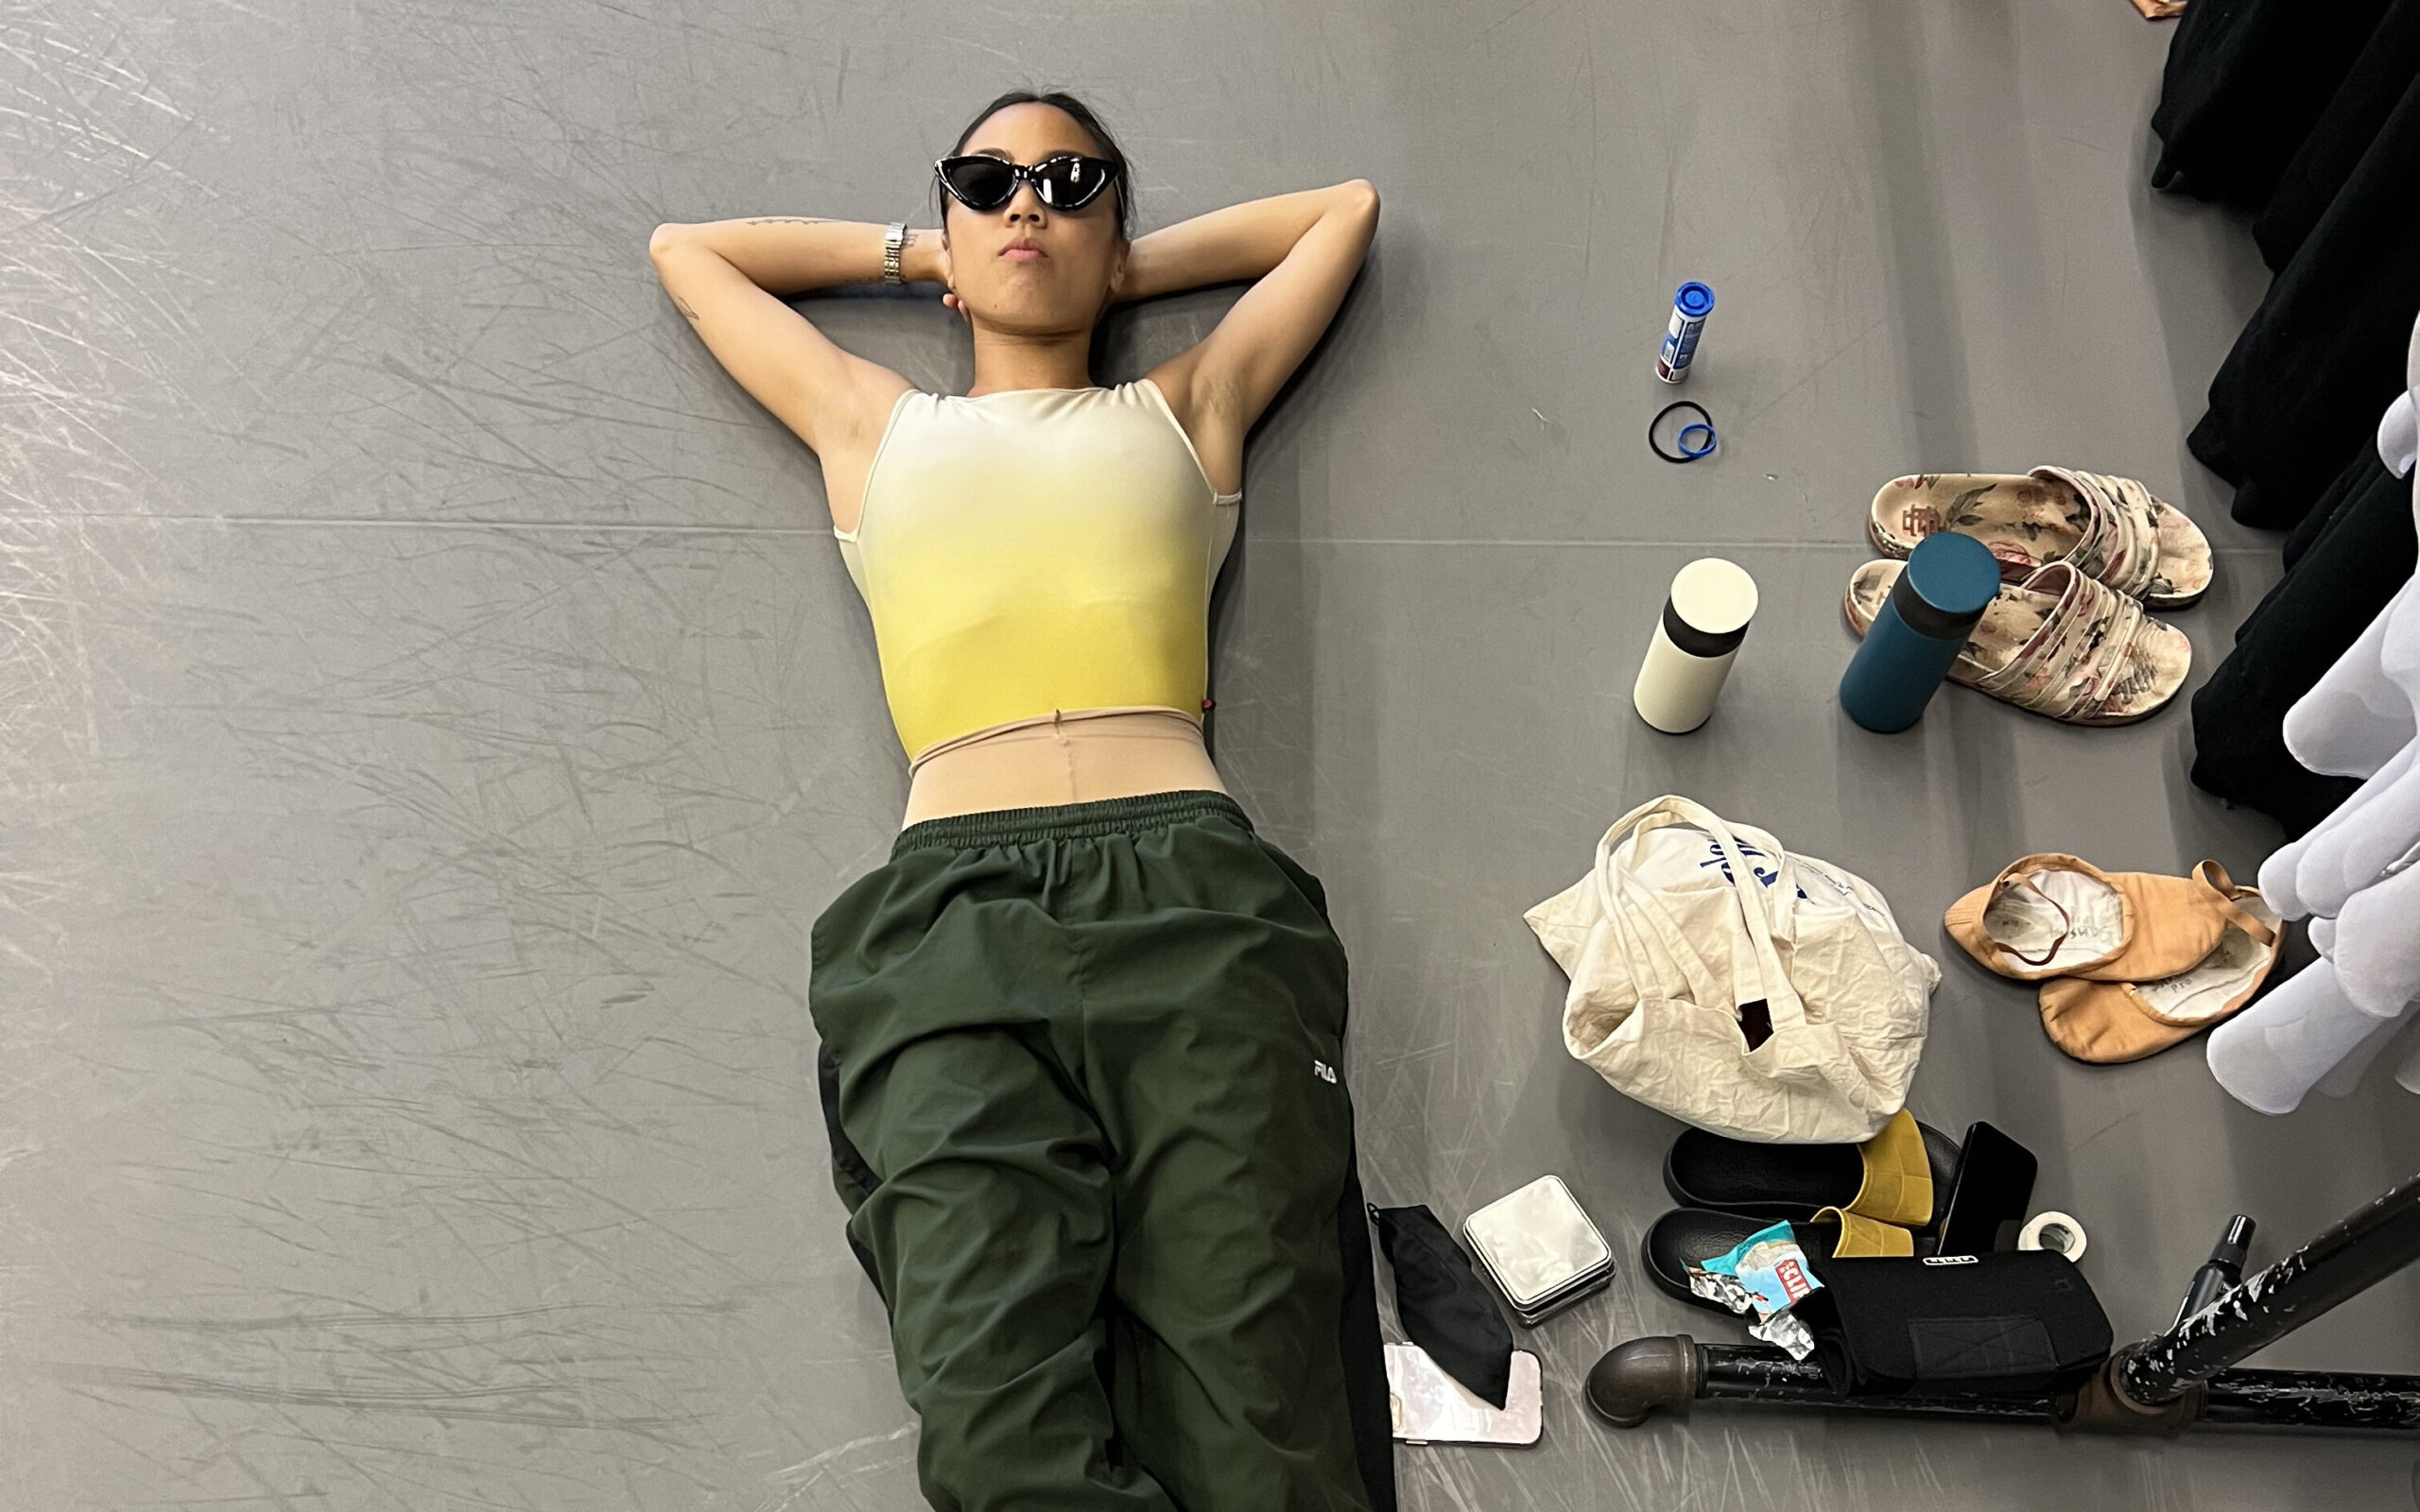 a dancer on the floor wearing dance clothes with dance items on the floor next to her